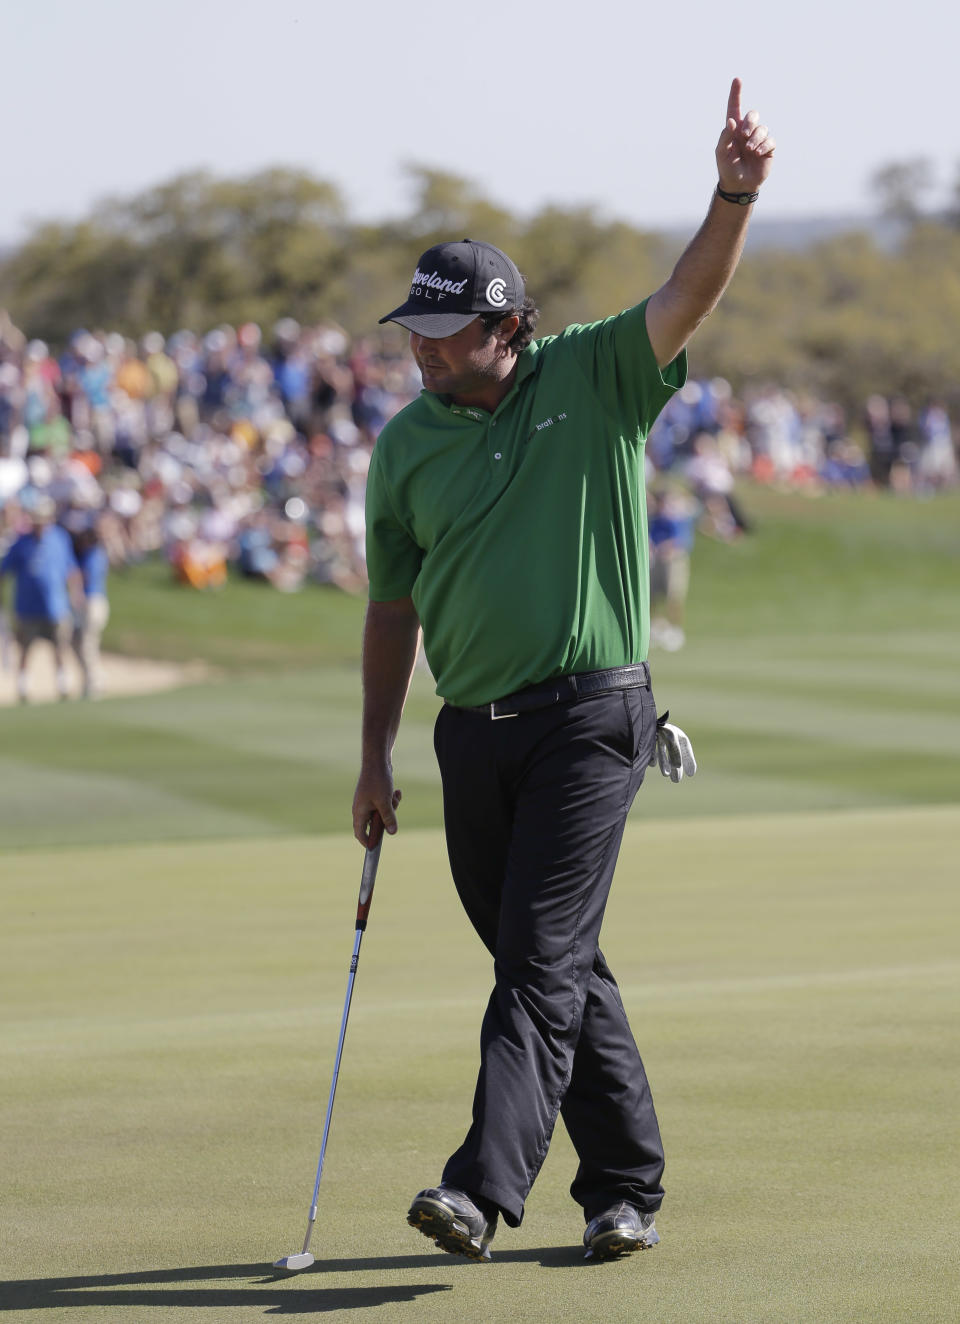 Steven Bowditch, of Australia, gestures after making his final putt to win the Texas Open golf tournament on Sunday, March 30, 2014, in San Antonio. (AP Photo/Eric Gay)